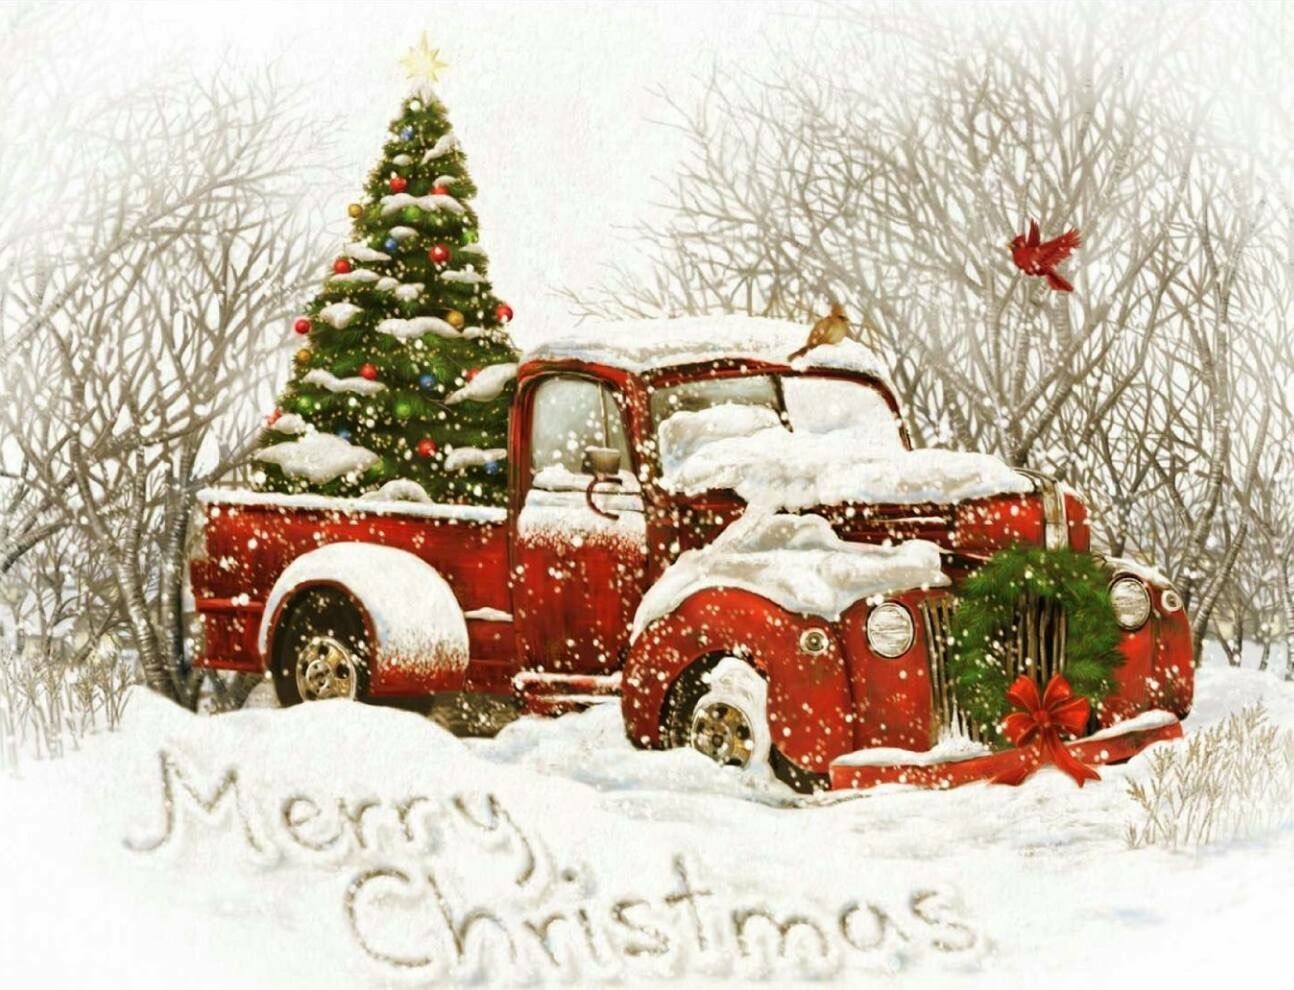 Details 54+ red truck christmas wallpaper latest - in.cdgdbentre